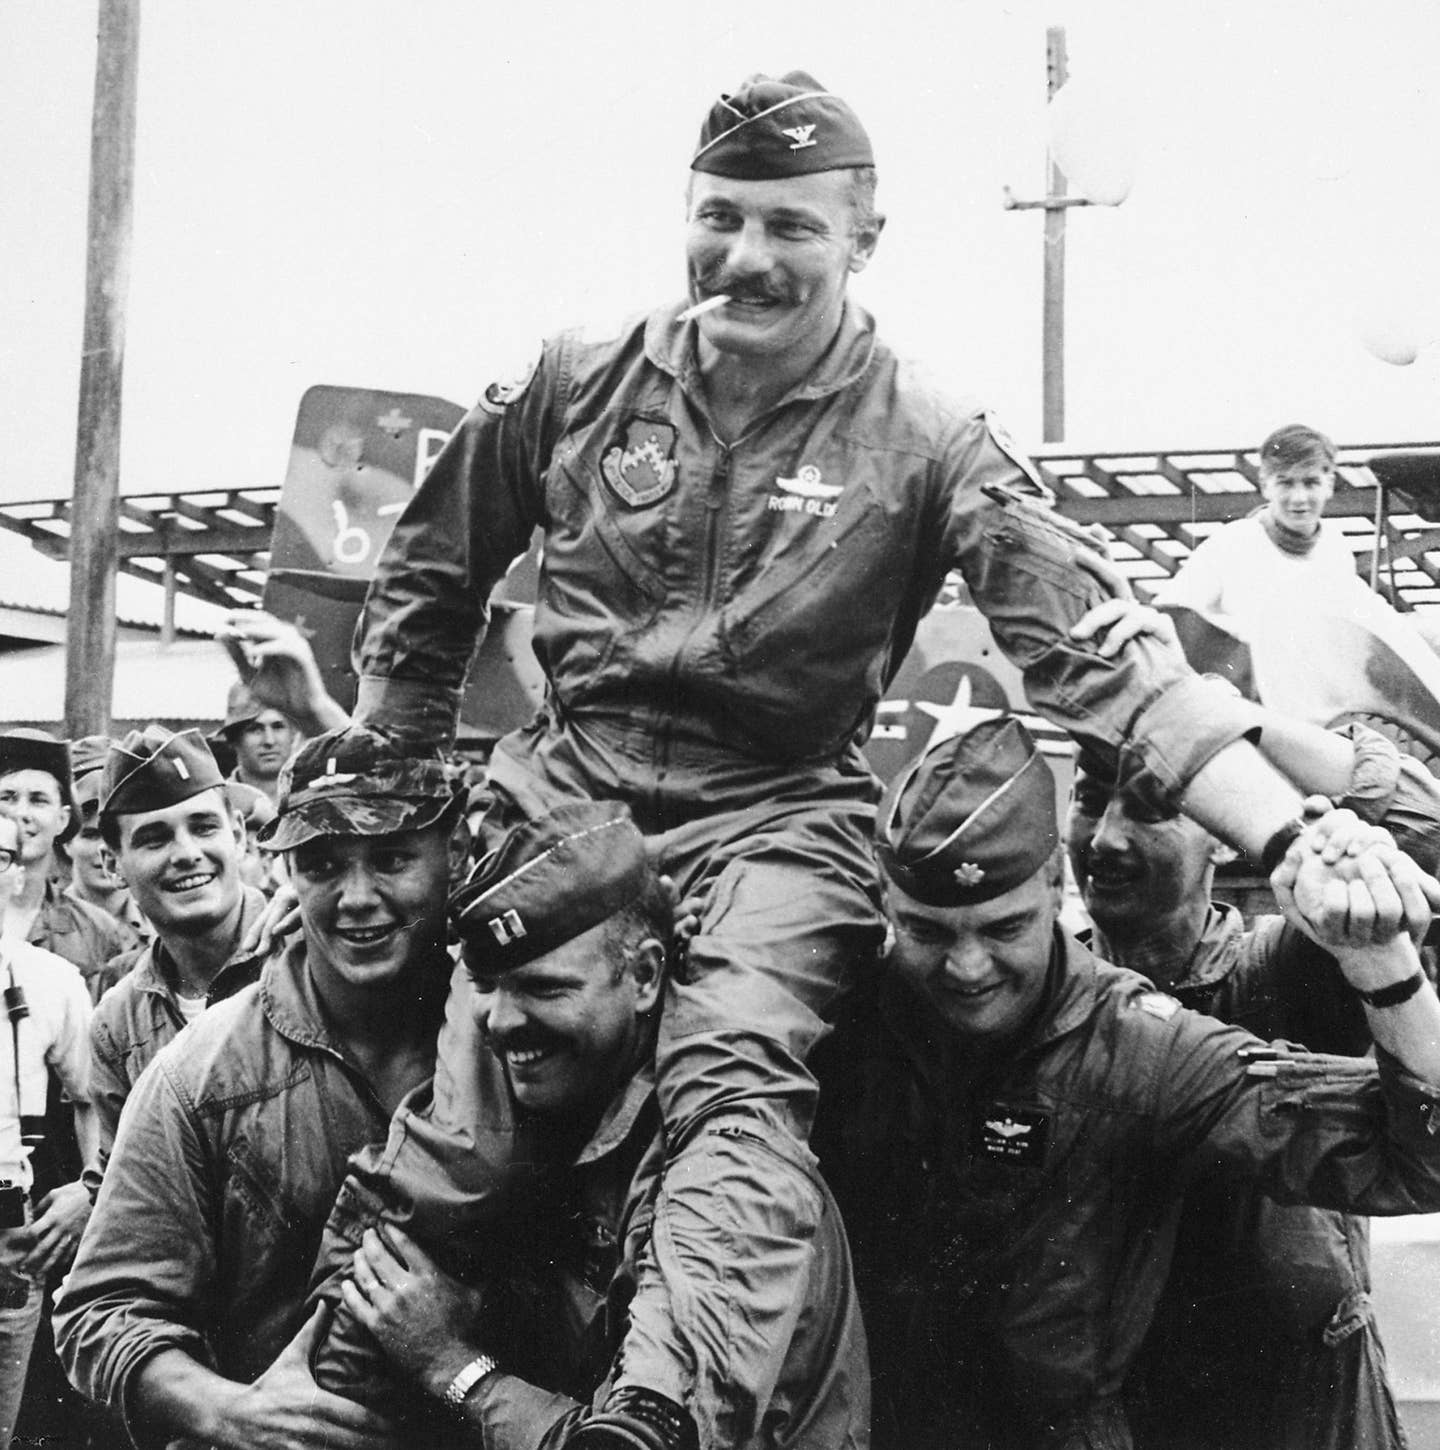 Members of the 8th Tactical Fighter Wing carry their commander, Col. Robin Olds, following his return from his last combat mission over North Vietnam, on September 23, 1967. <em>U.S. Air Force</em><br><a href="https://www.nationalmuseum.af.mil/Visit/Museum-Exhibits/Fact-Sheets/Display/Article/196007/brig-gen-robin-olds-combat-leader-and-fighter-ace/undefined"></a>